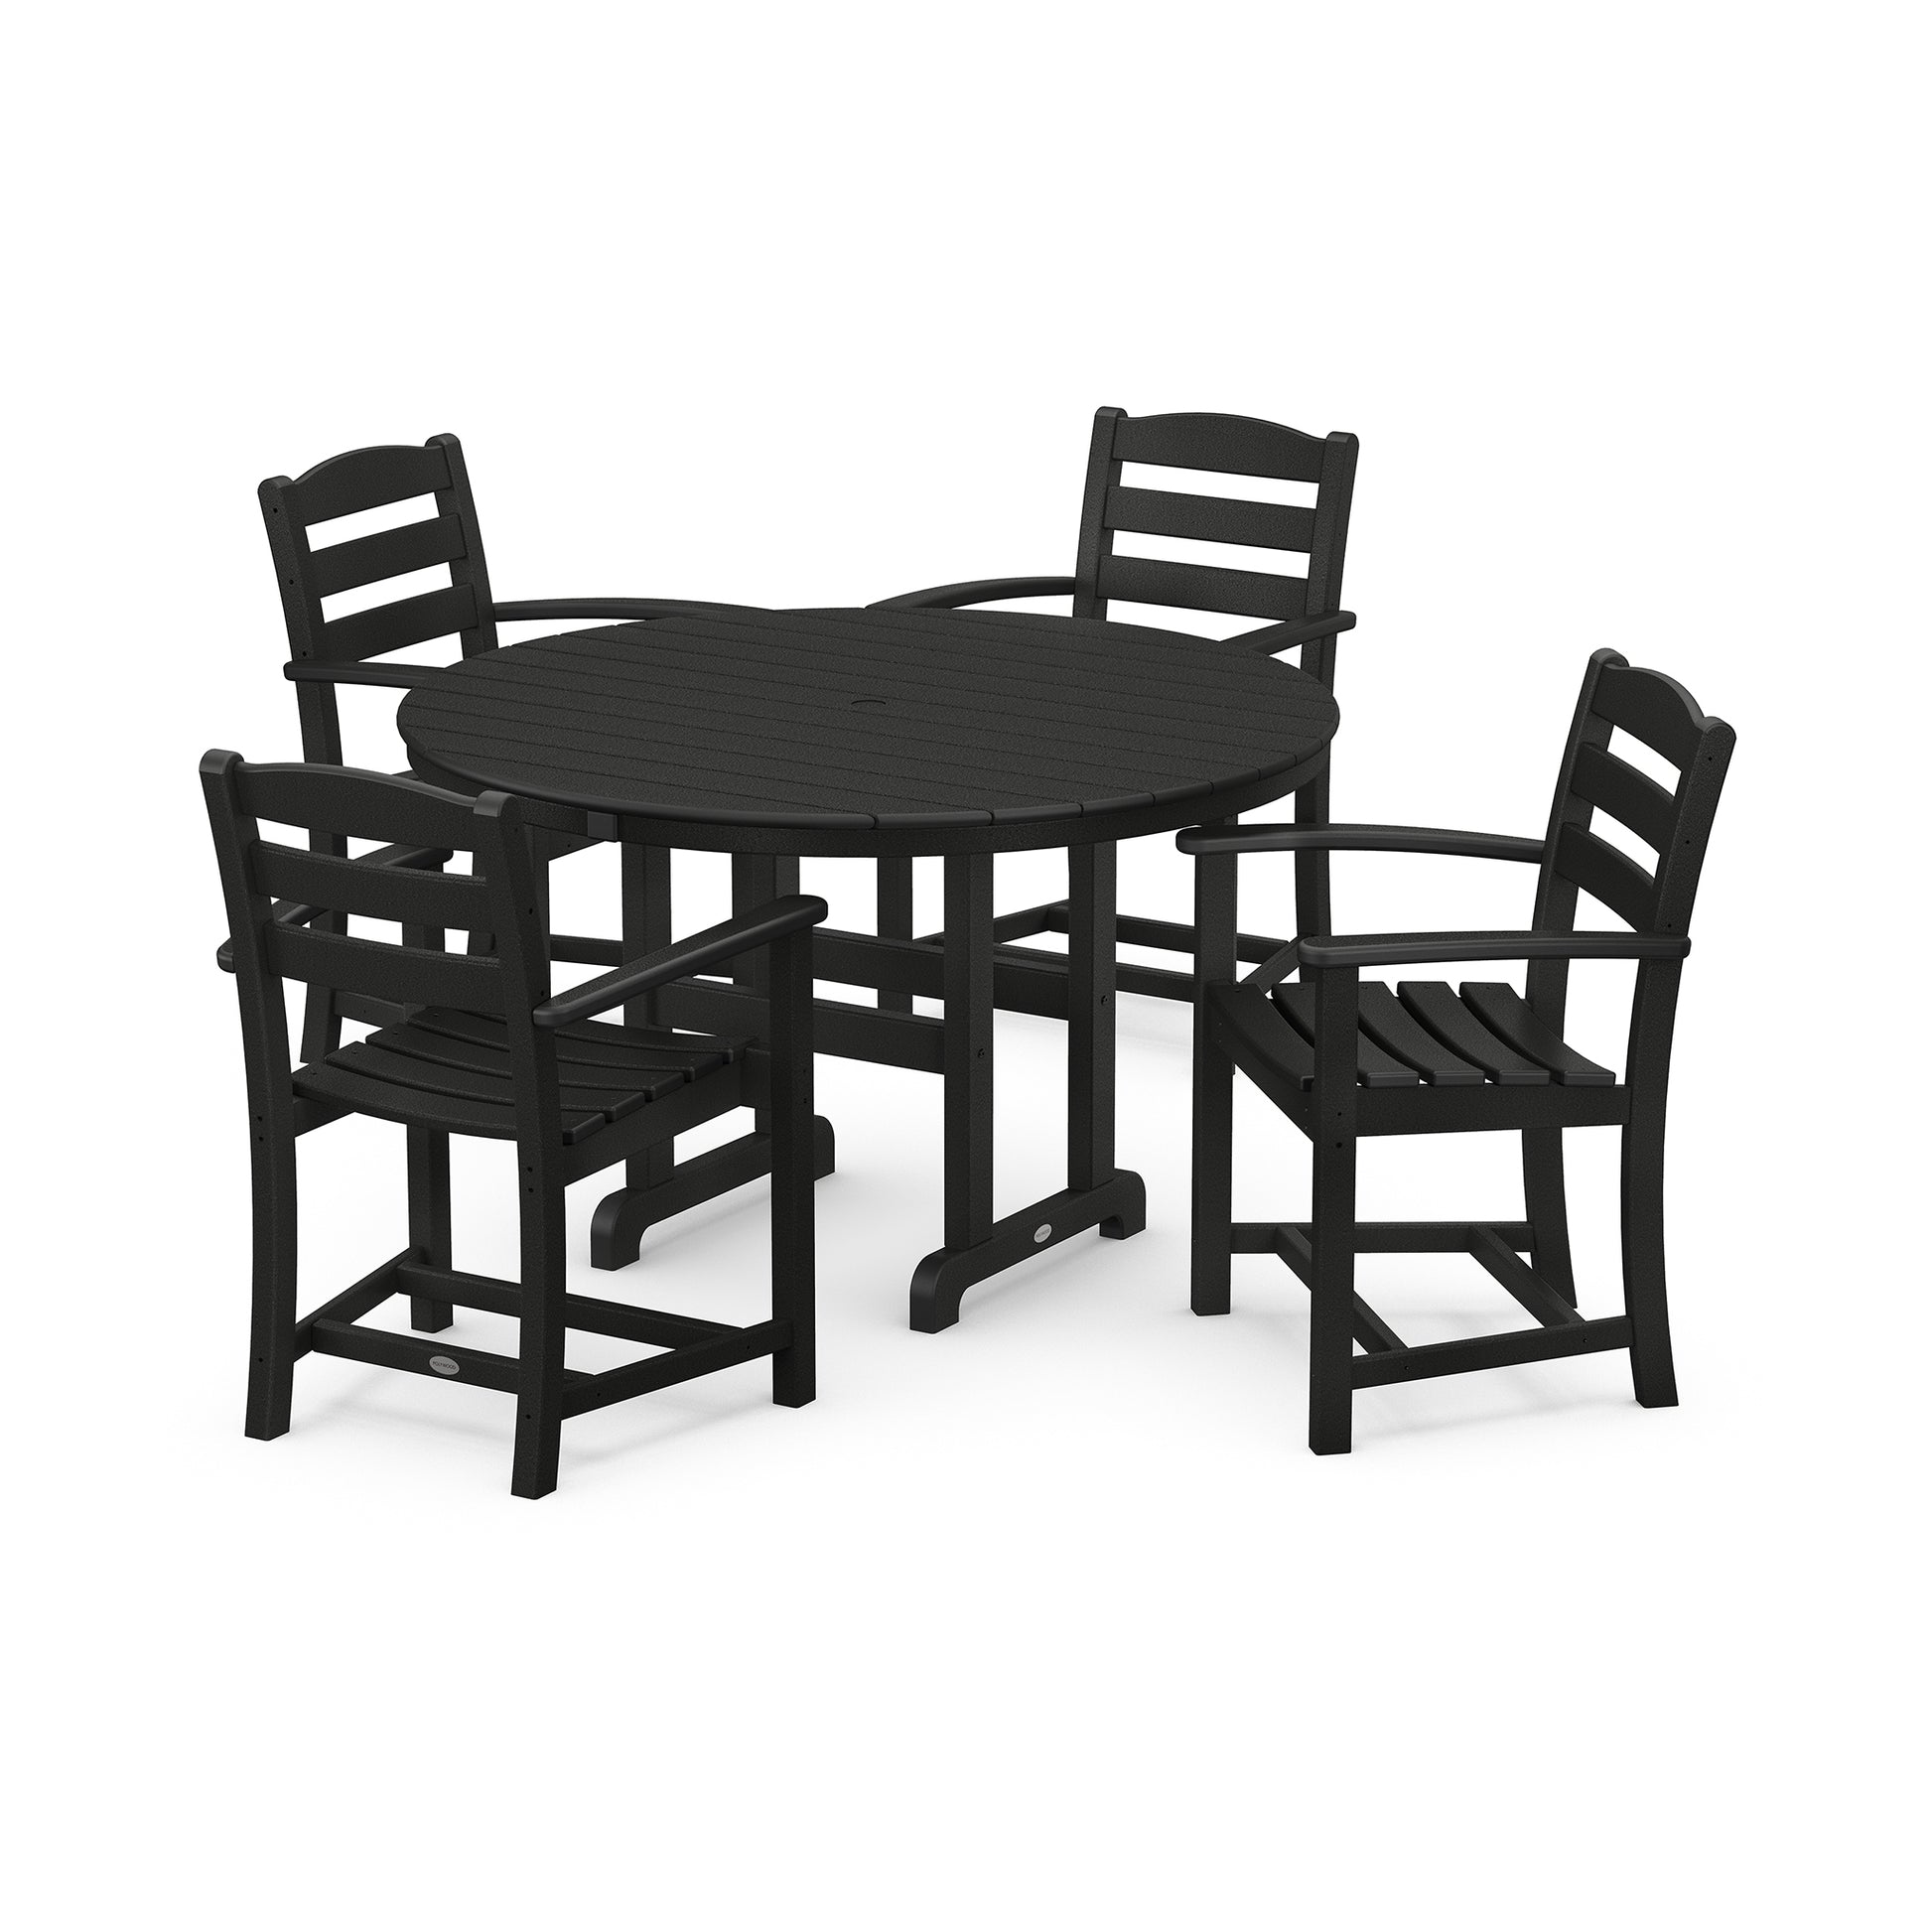 A durable black outdoor dining set consisting of a round table and four matching chairs, all made of POLYWOOD or a similar material, depicted on a plain white background.